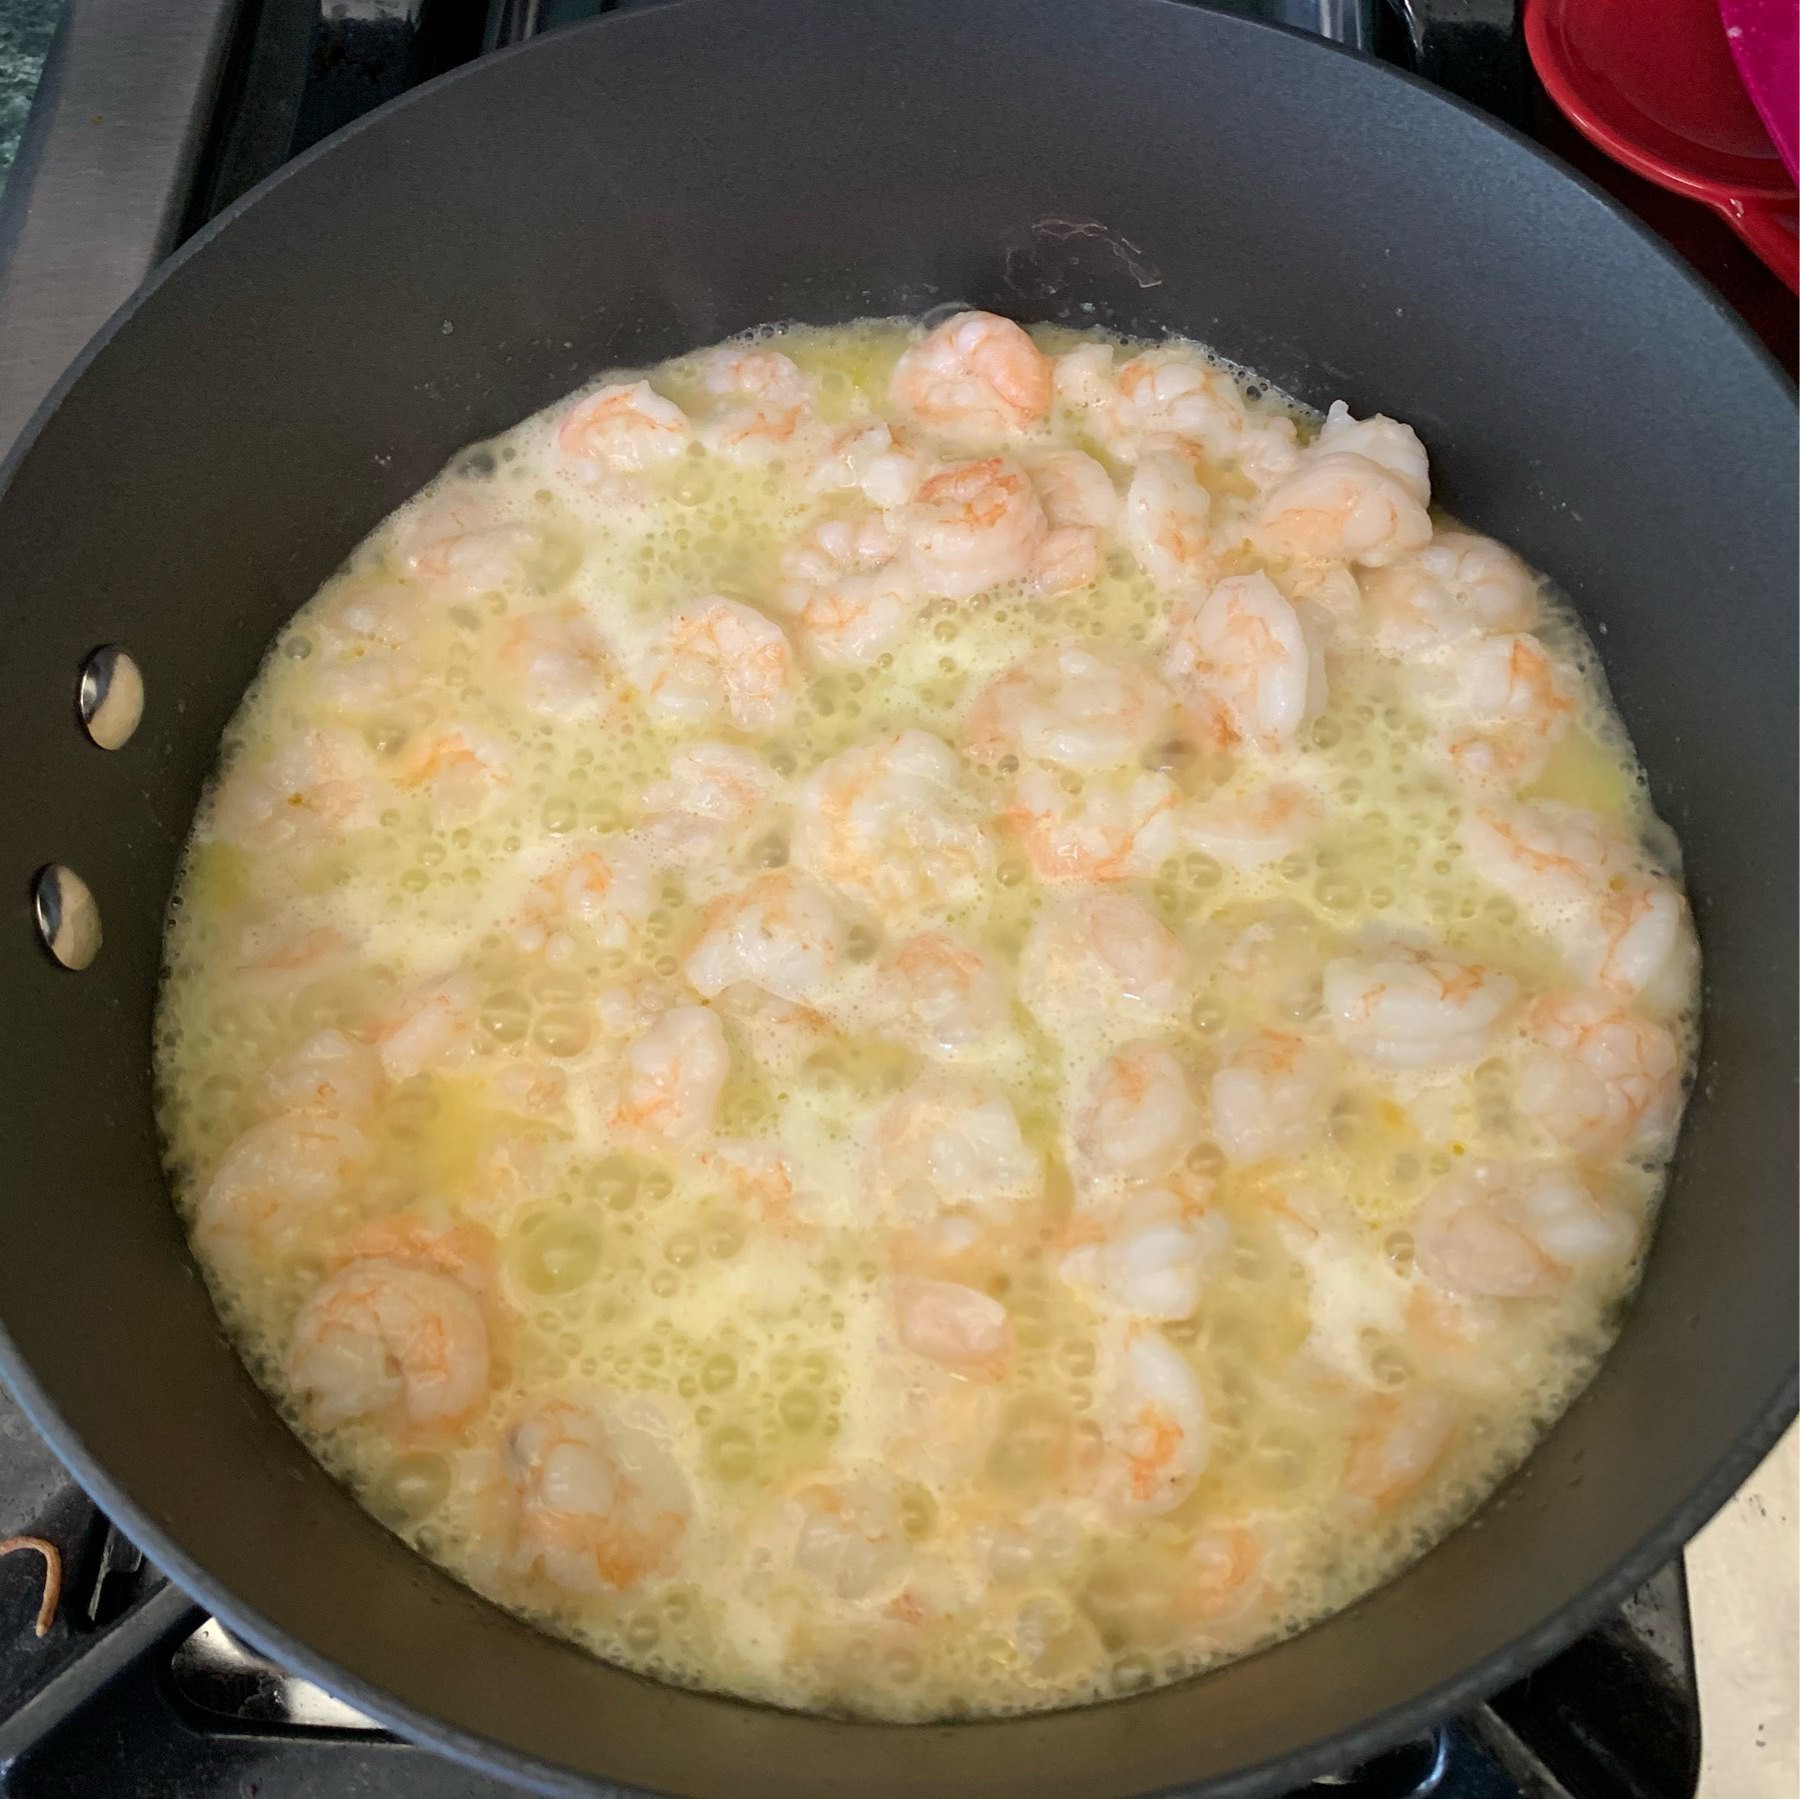 Shrimp cooking in a butter bath